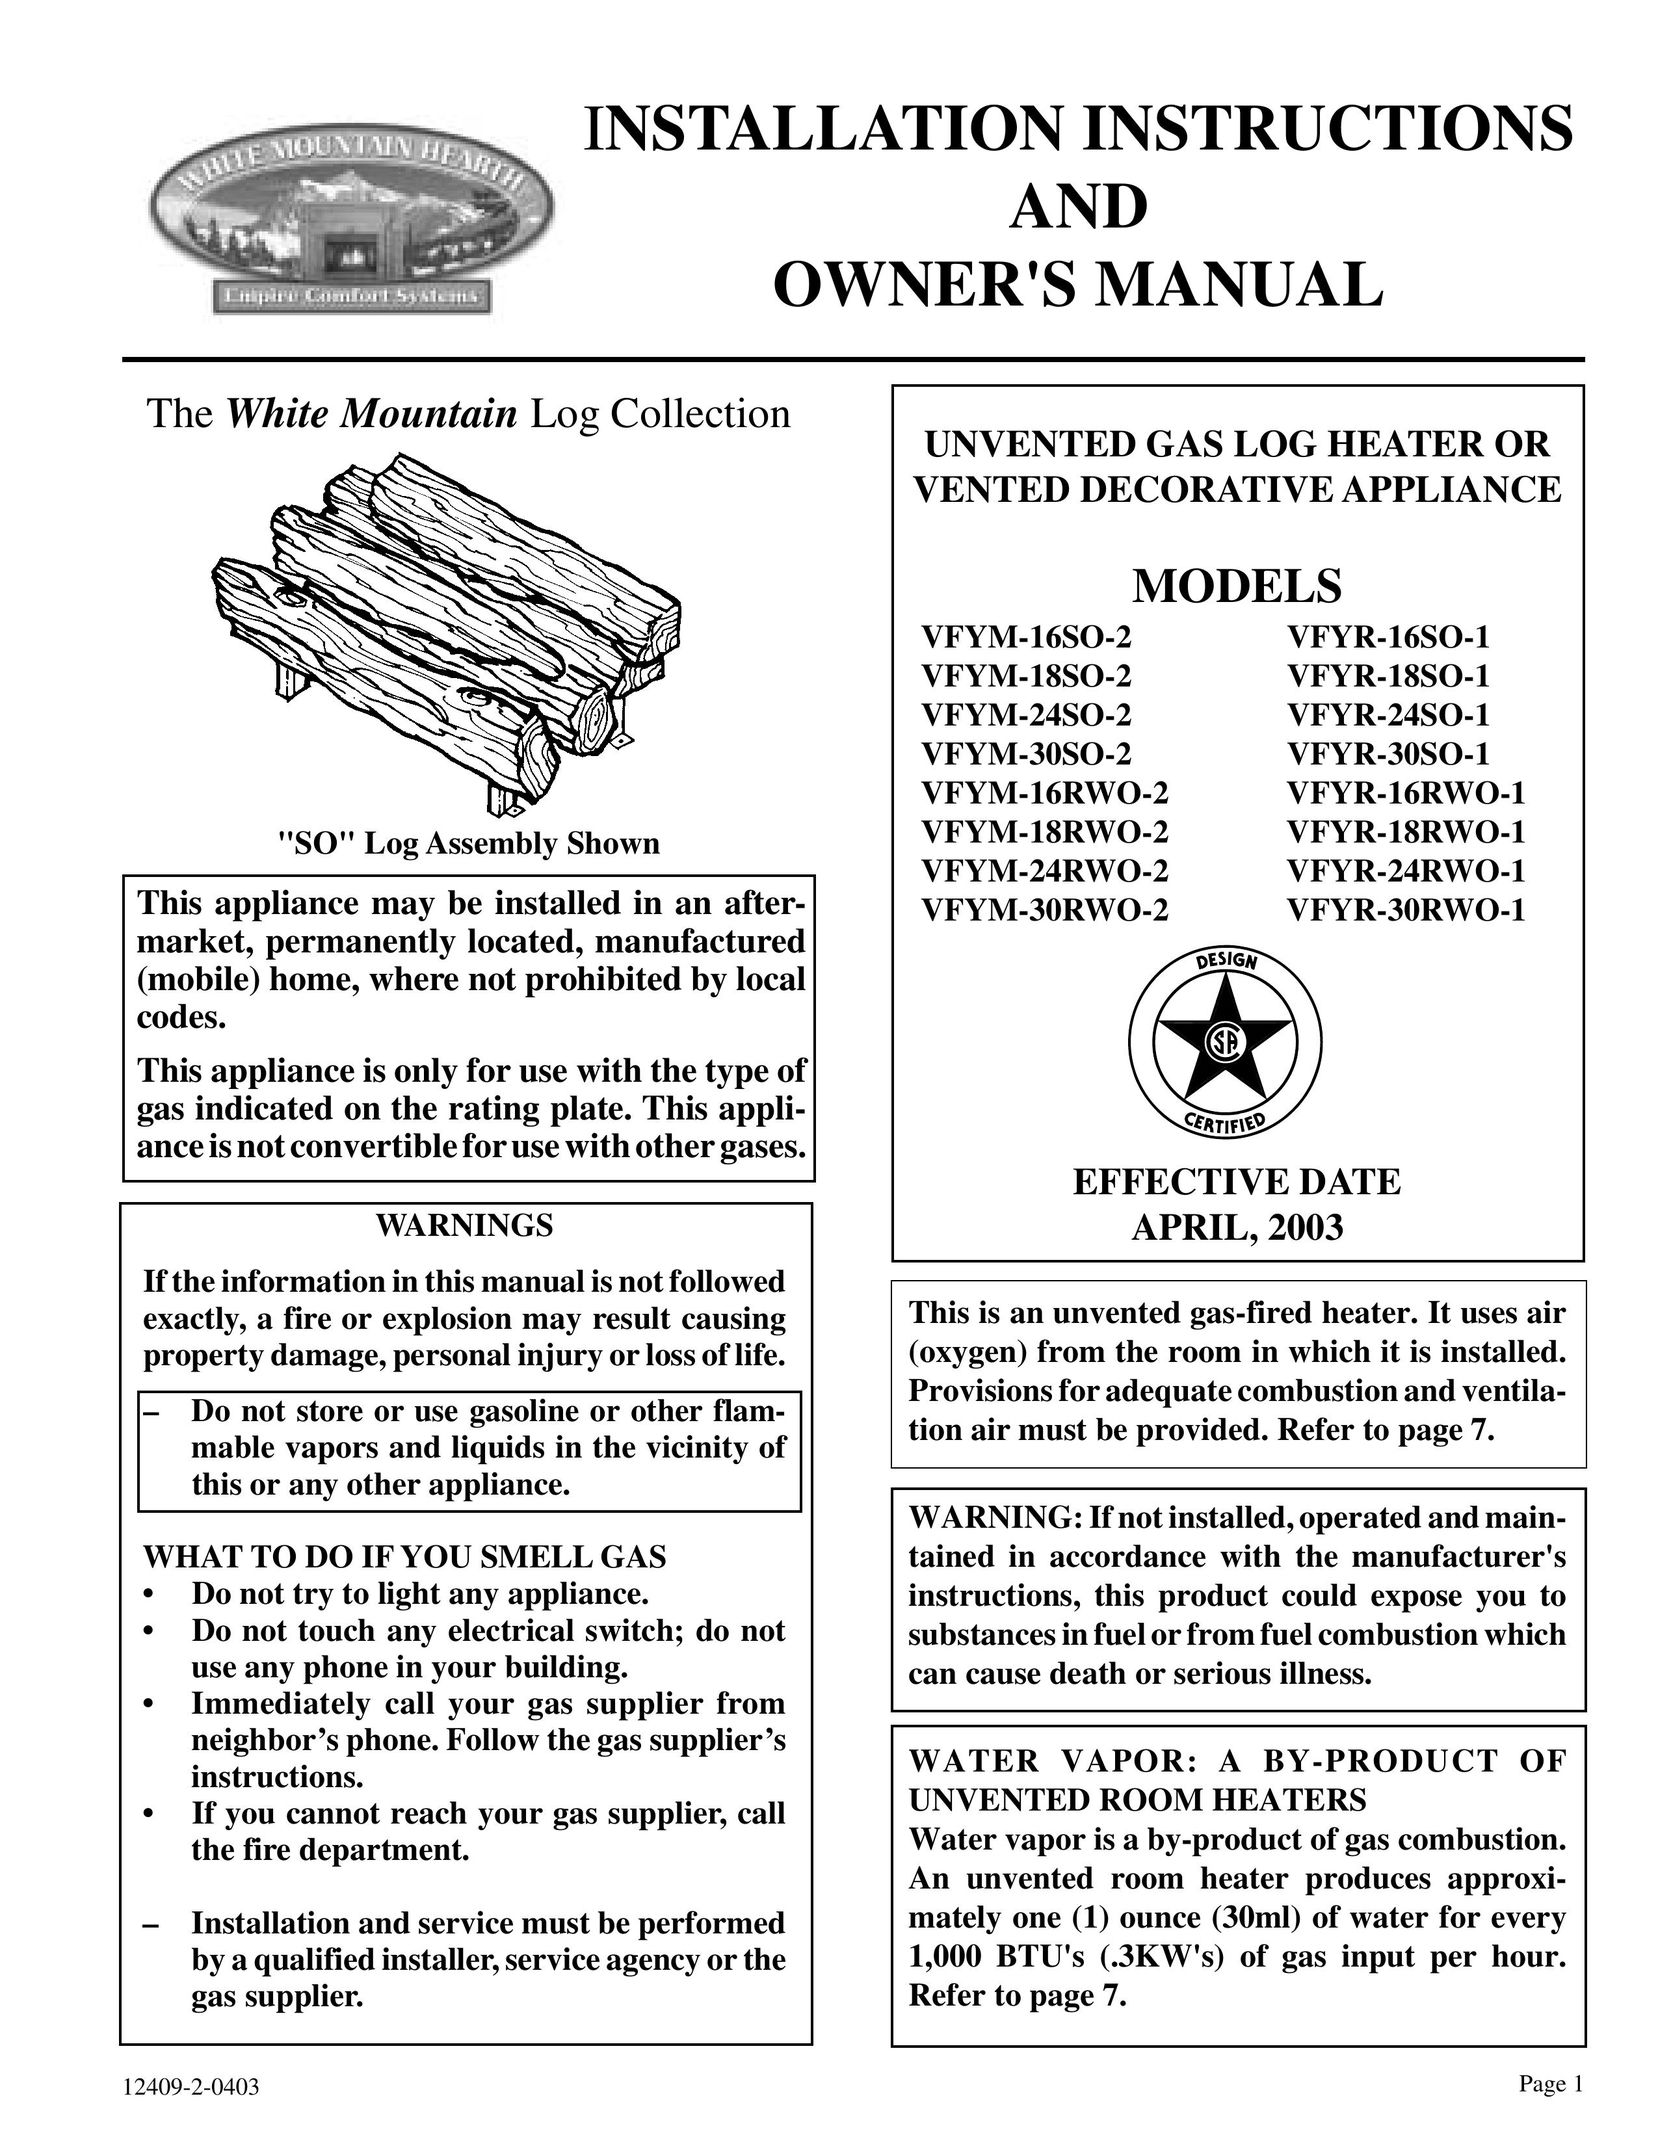 Empire Comfort Systems VFYM-16RWO-2 Water Heater User Manual